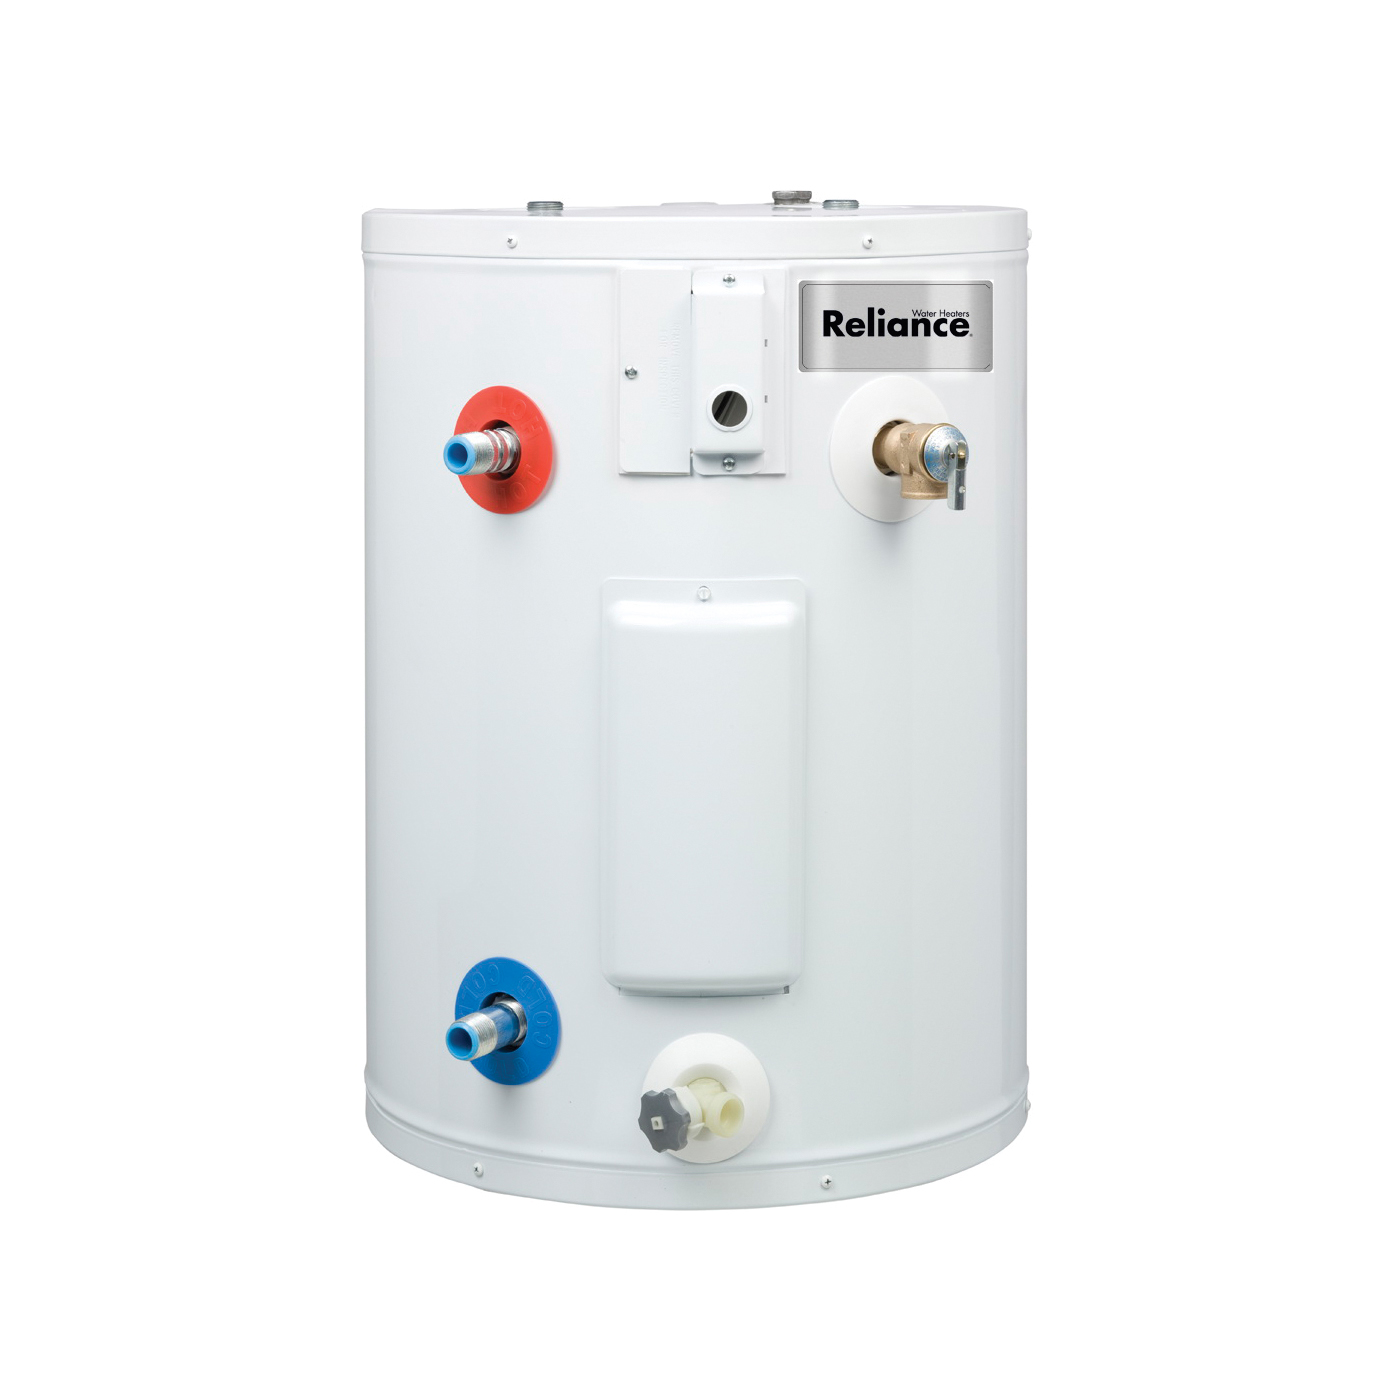 6 20 SOMS K Electric Water Heater, 120 V, 1650 W, 20 gal Tank, Copper Heating Element, Wall Mounting